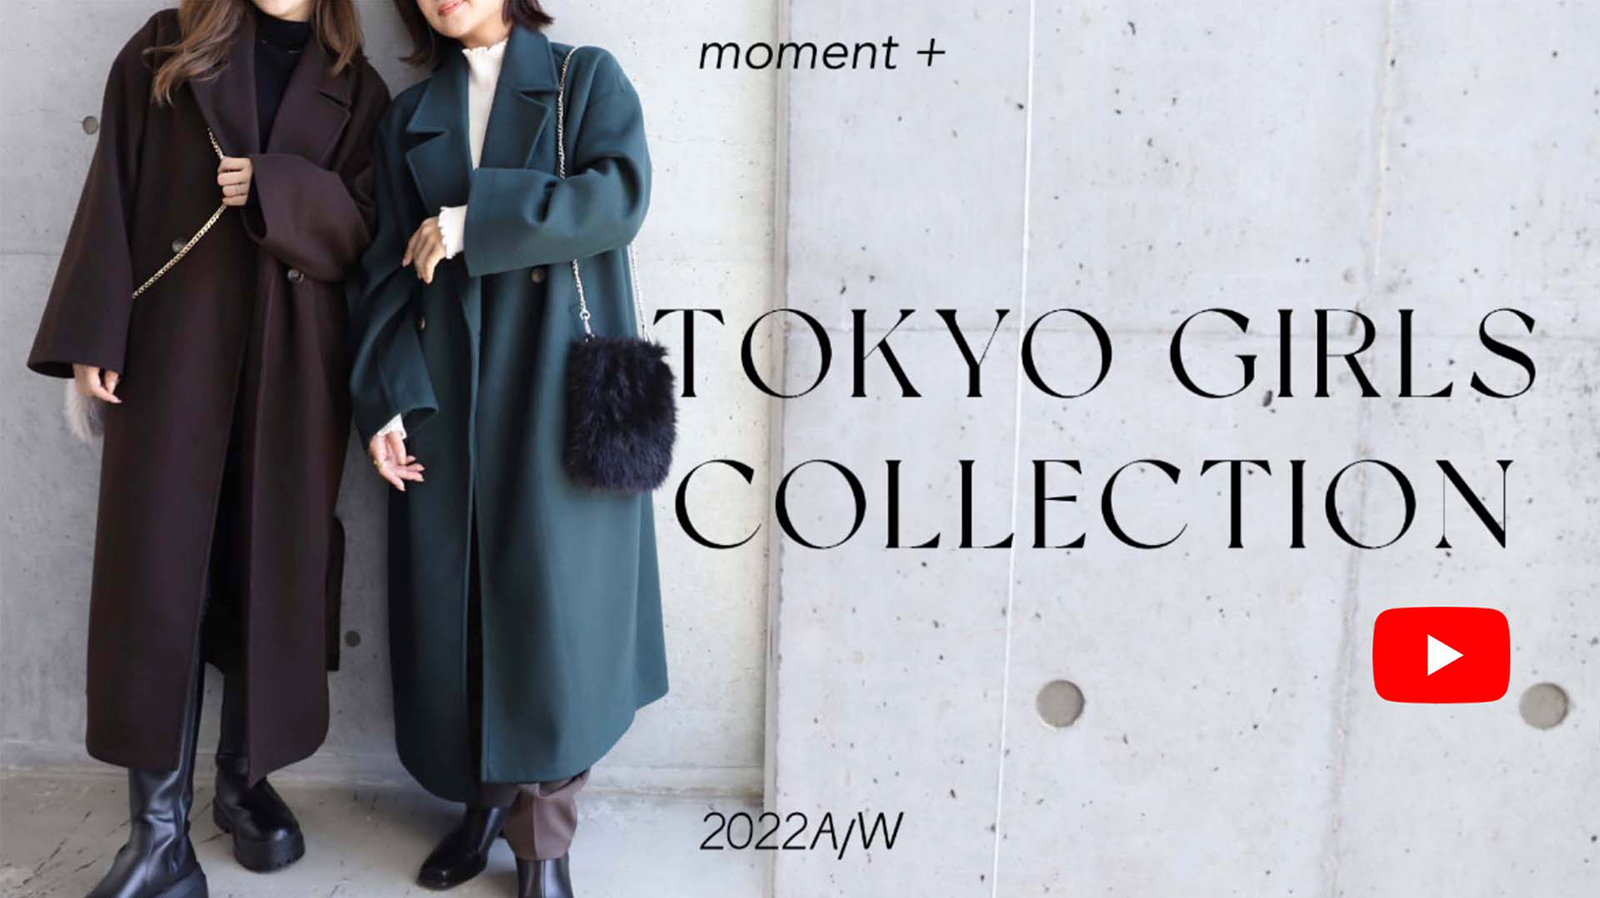 Tokyo Girls Collection